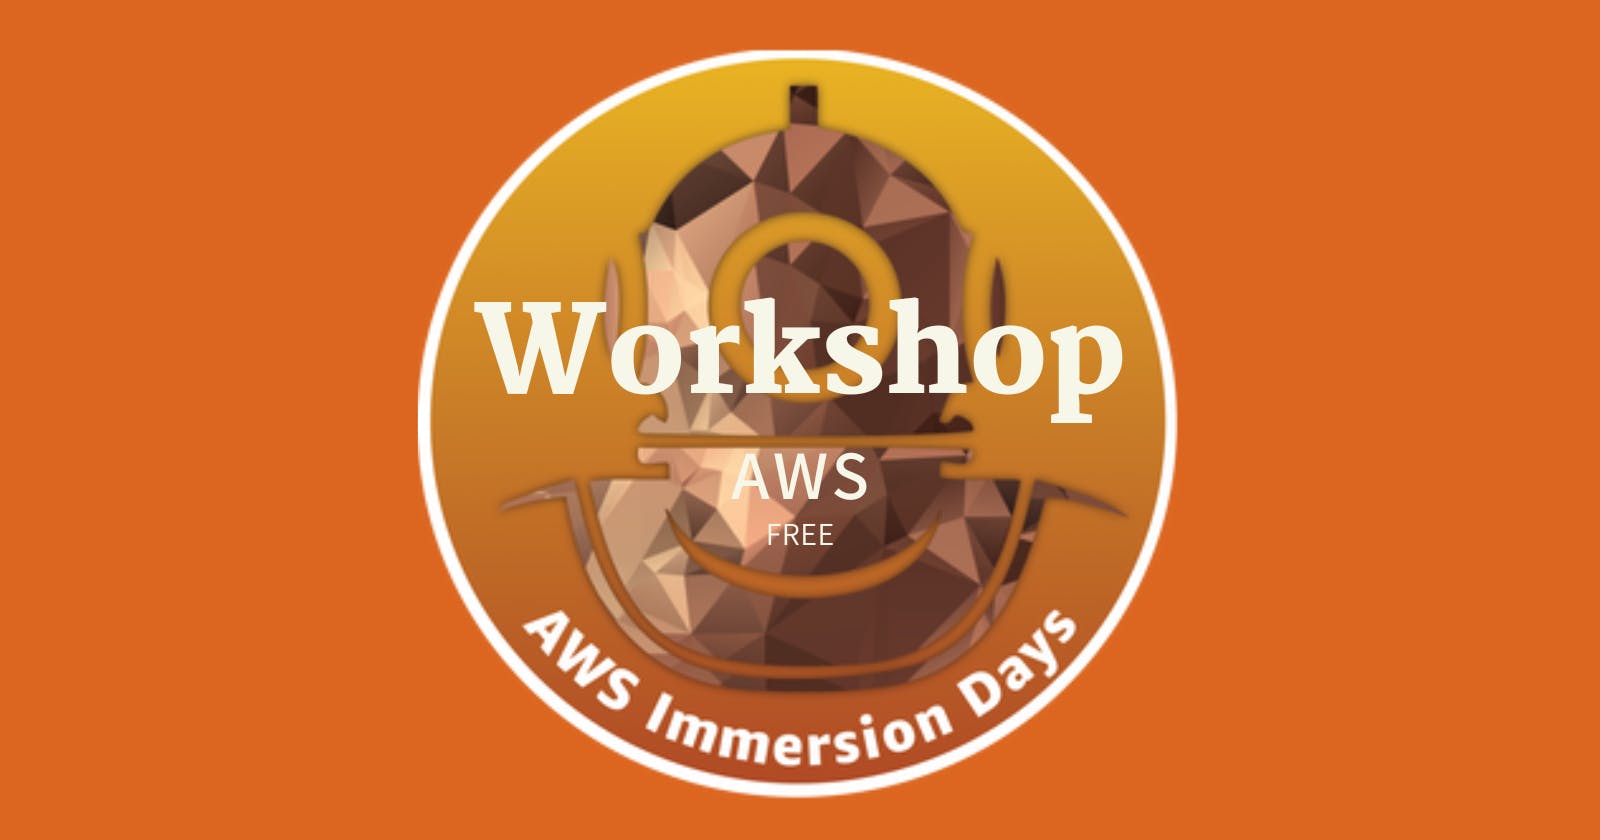 AWS General Immersion Day: Deep Dive into Practical AWS Expertise - for FREE!